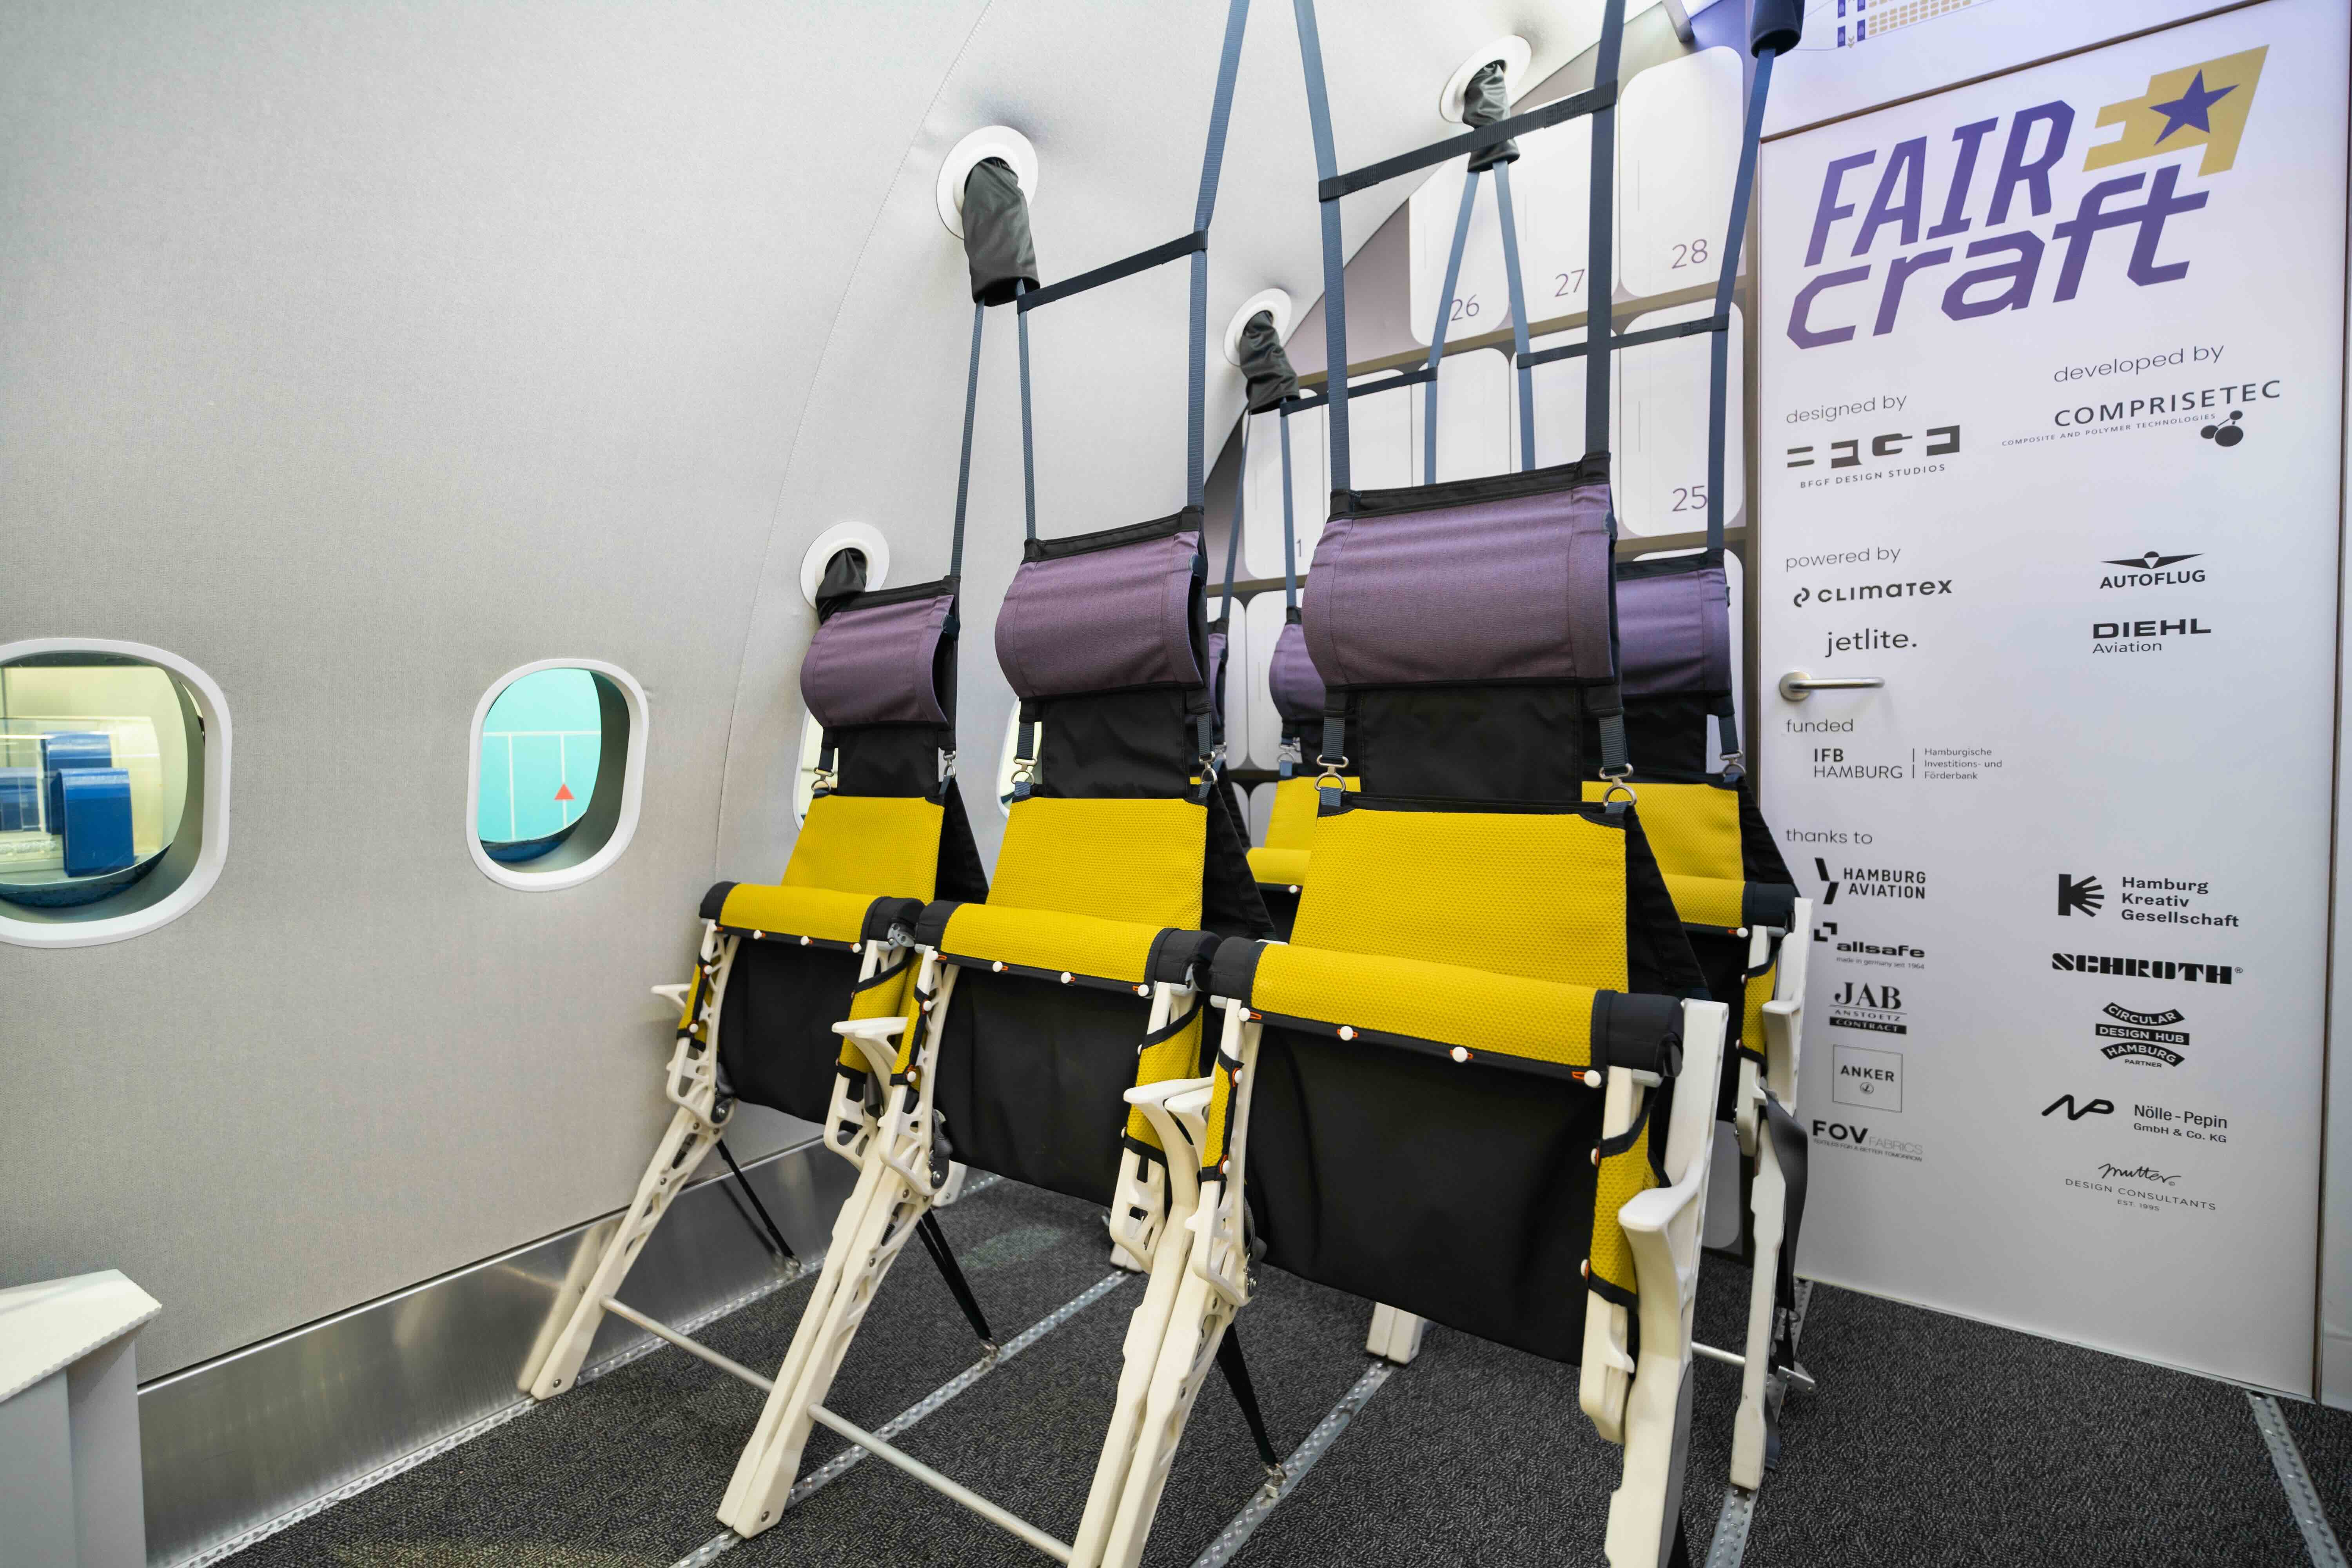 FAIRCRAFT seats save half the weight thanks to lightweight textiles and the absence of heavy metal frames.